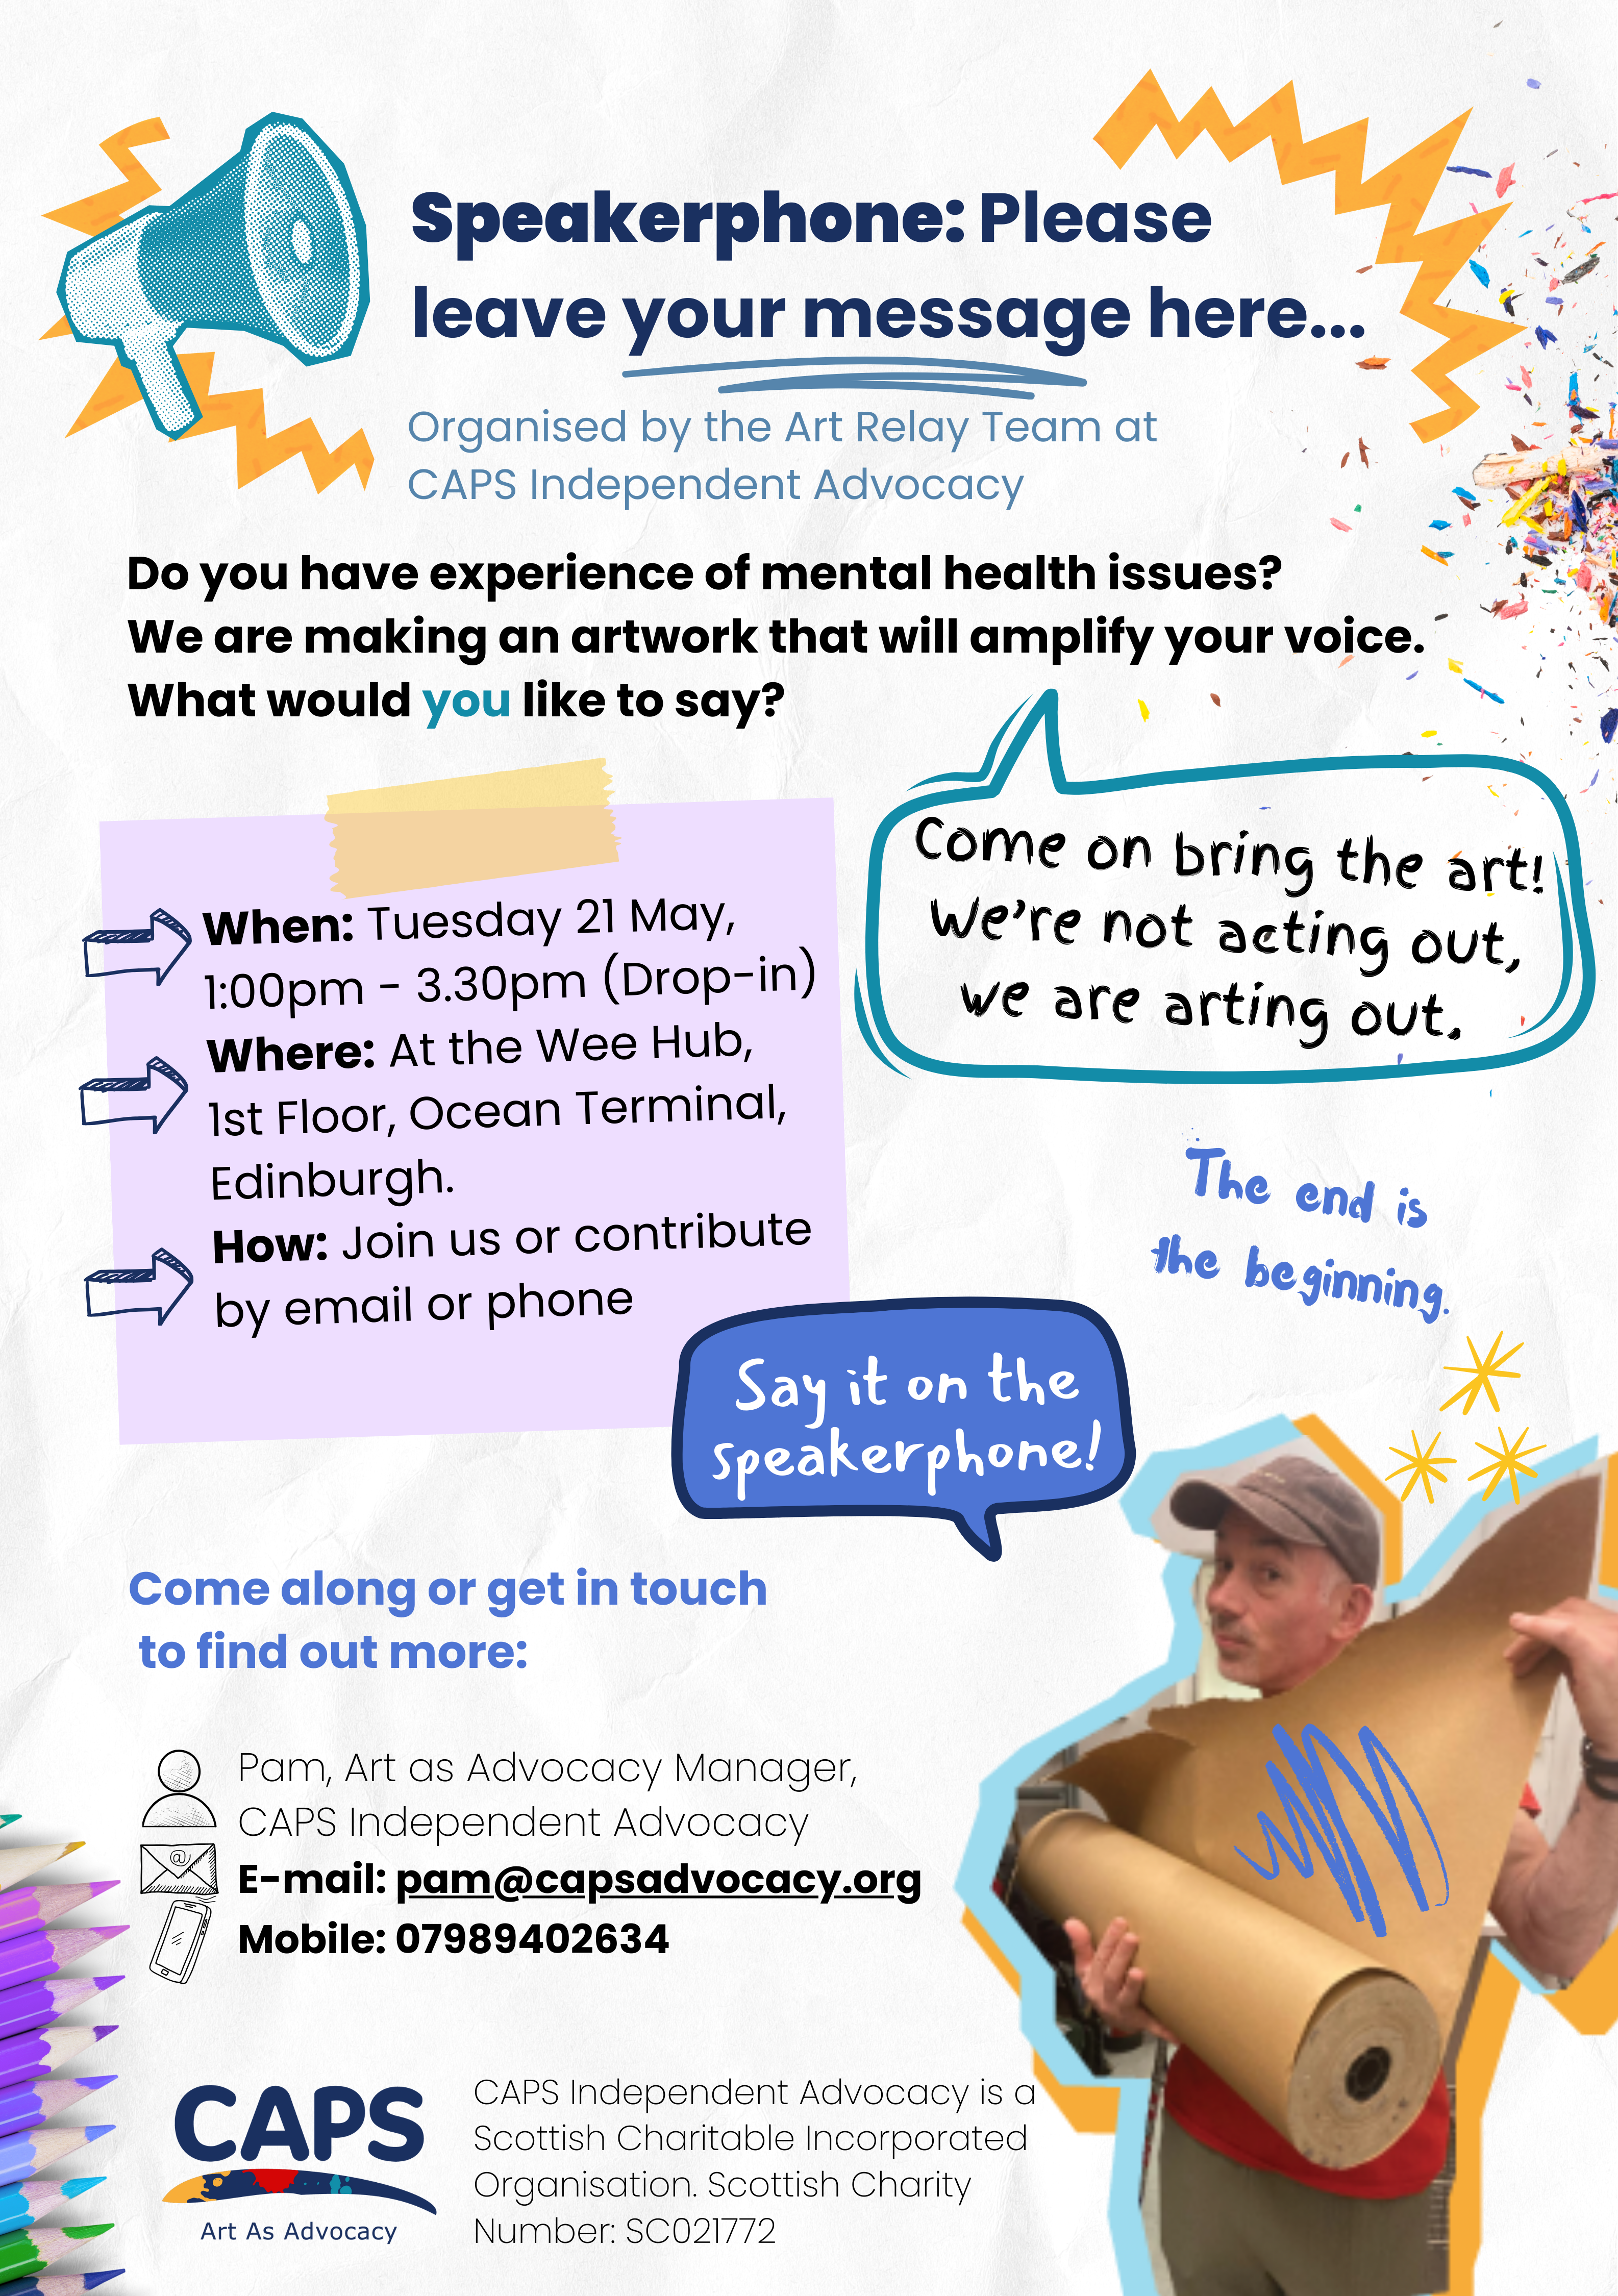 Speakerphone: please leave your message here…
Organised by the art relay team at CAPS Independent Advocacy
Do you have experience of mental health issues? We are making an artwork that will amplify your voice
What would you like to say
Come on bring the art! We’re not acting out, we are arting out.

When: Tuesday 21st May 1:00pm-3.30pm (Drop-in) Where: At the Wee Hub 1st Floor Ocean Terminal, Edinburgh How: Join us or contribute by email or phone

The end is the beginning

Say it on the speakerphone!
Come along or get in touch to find out more: Pam, Art as Advocacy Manager E-mail: pam@capsadvocacy.org, mobile: 07989402634
CAPS Independent Advocacy is a Scottish Charitable Incorporated Organisation Scottish Charity number: SC021772
